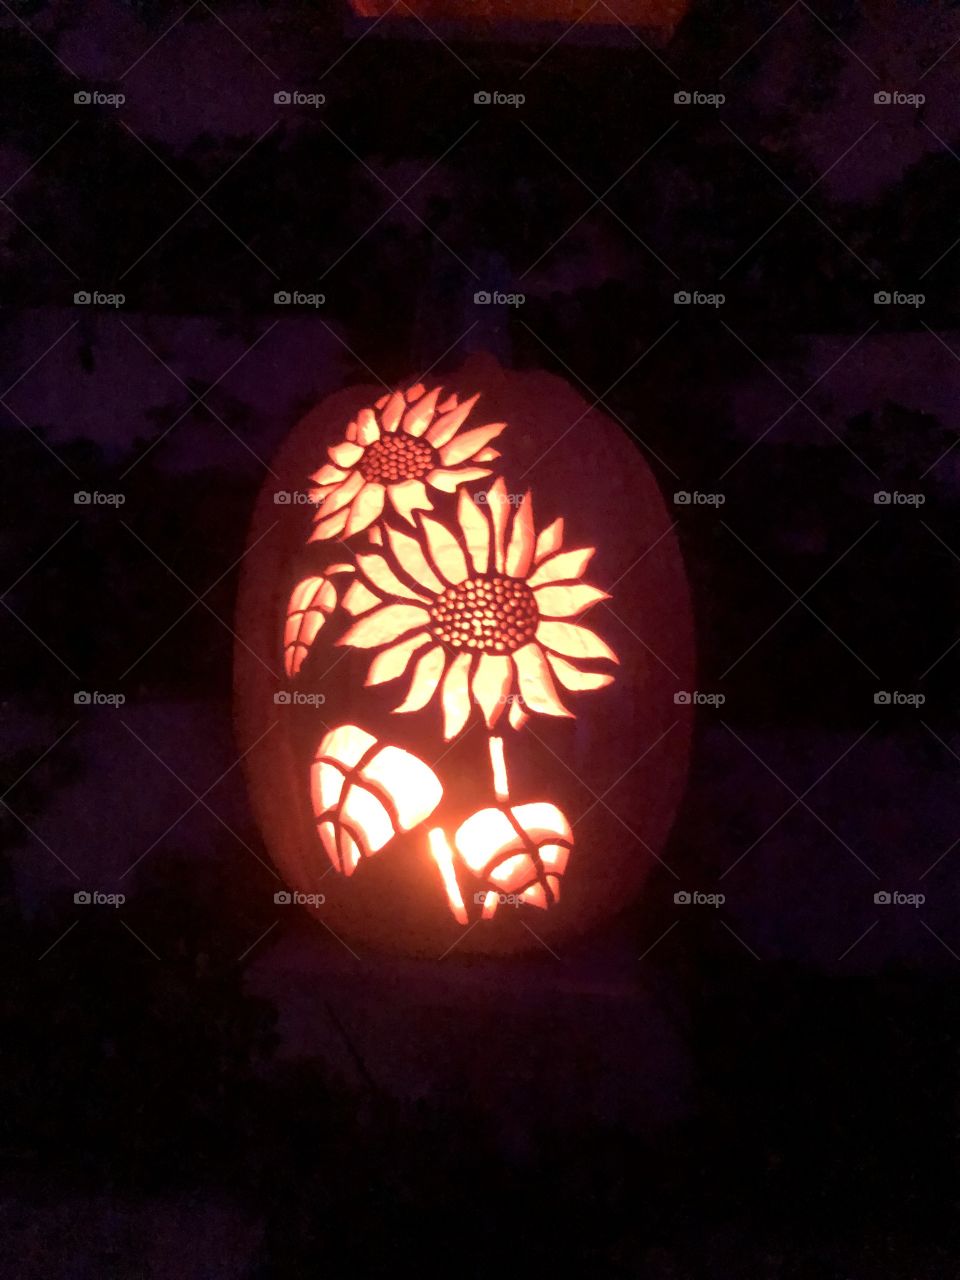 Sunflowers carved into pumpkin 